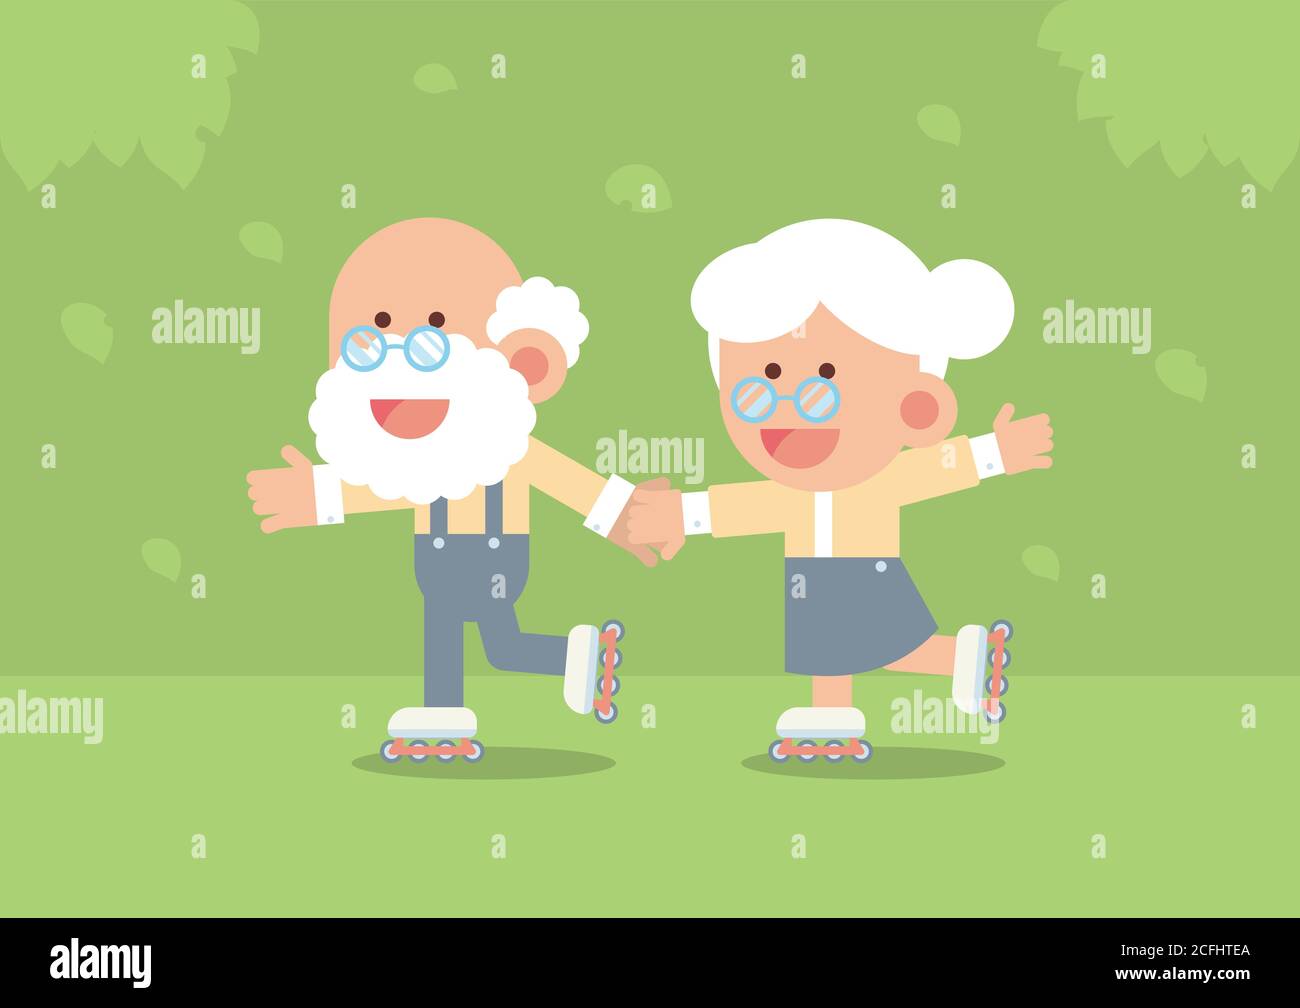 Elderly couple smiling, holding hands and skating on rollerblades outdoor with trees and falling leaves in cute flat cartoon style Stock Vector